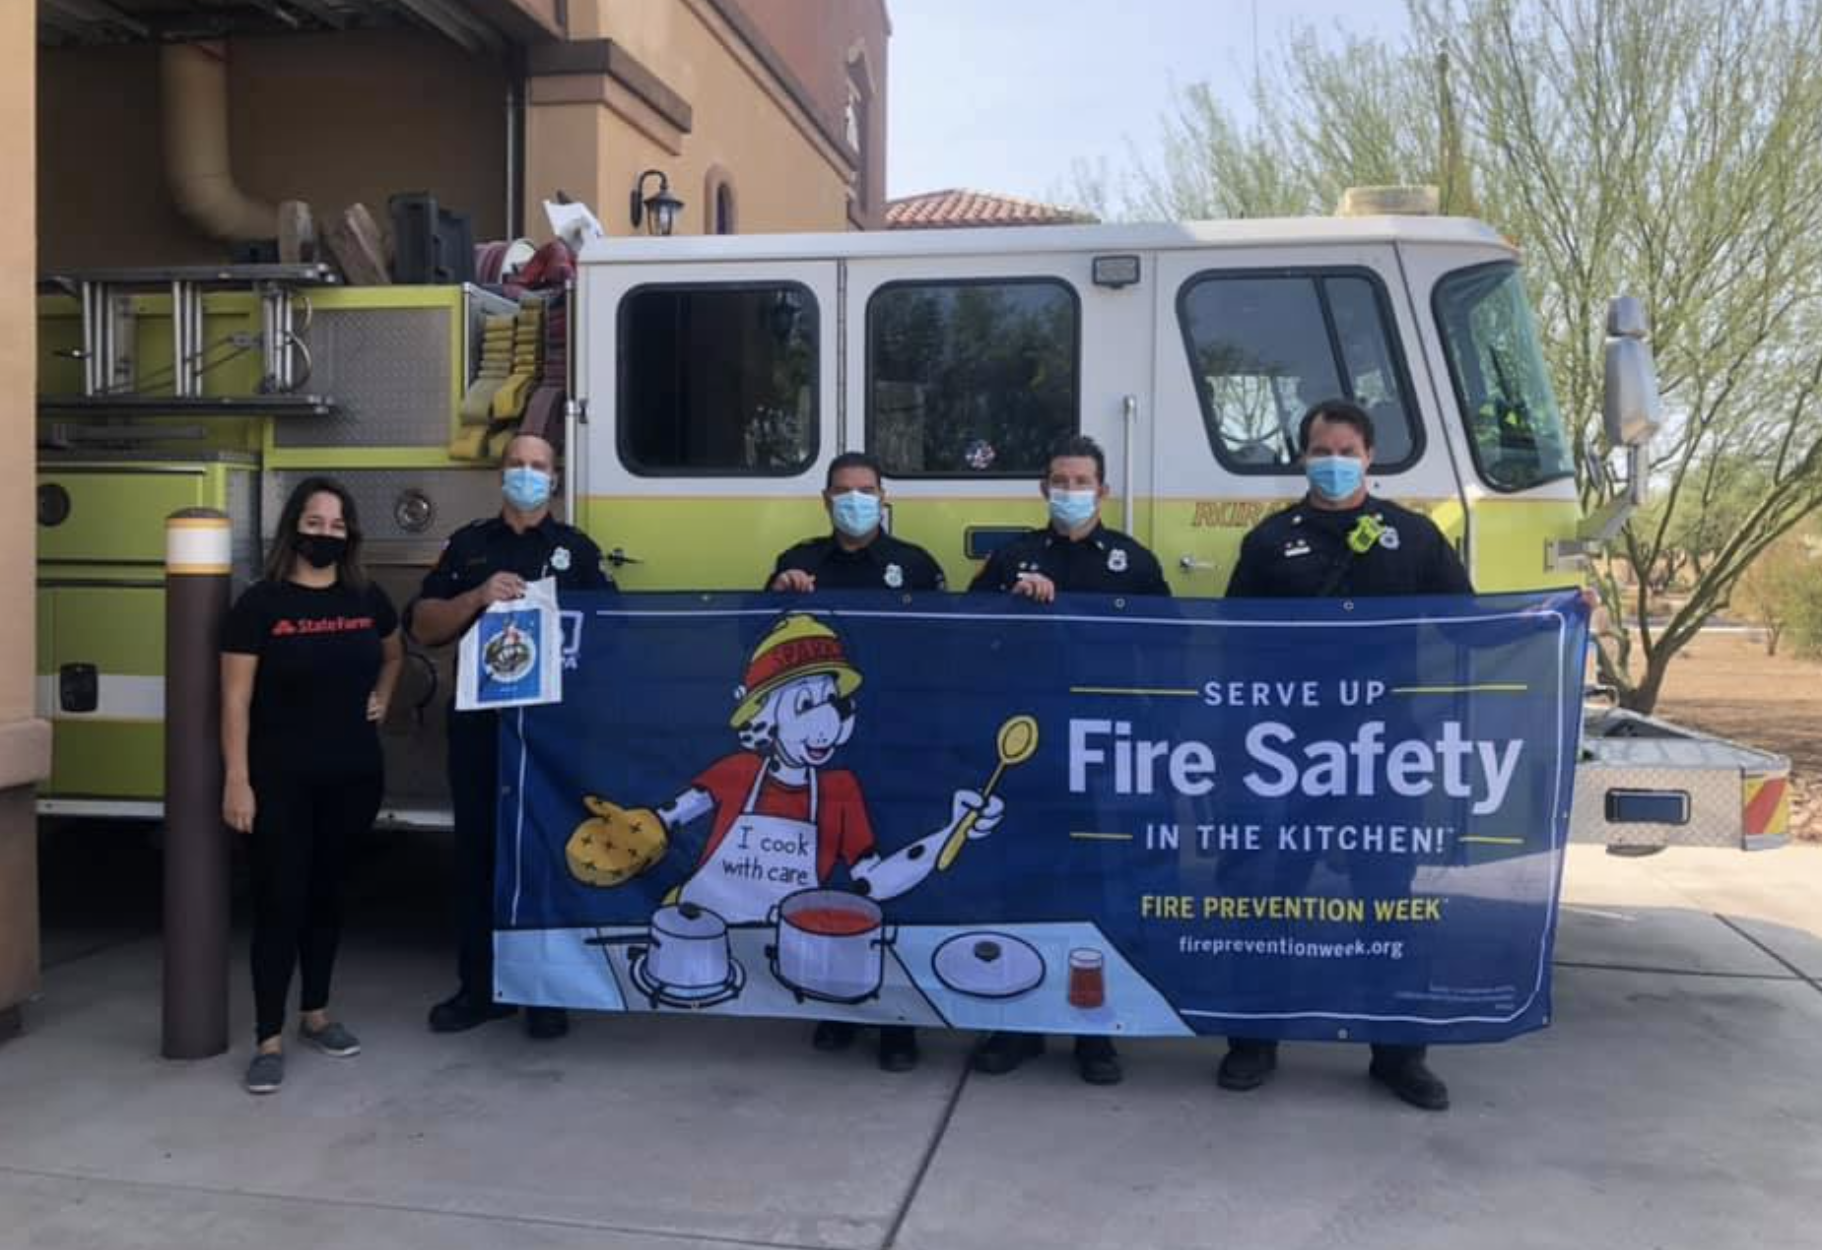 We enjoyed meeting the local Sahuarita firefighters and donating Fire Prevention Kits